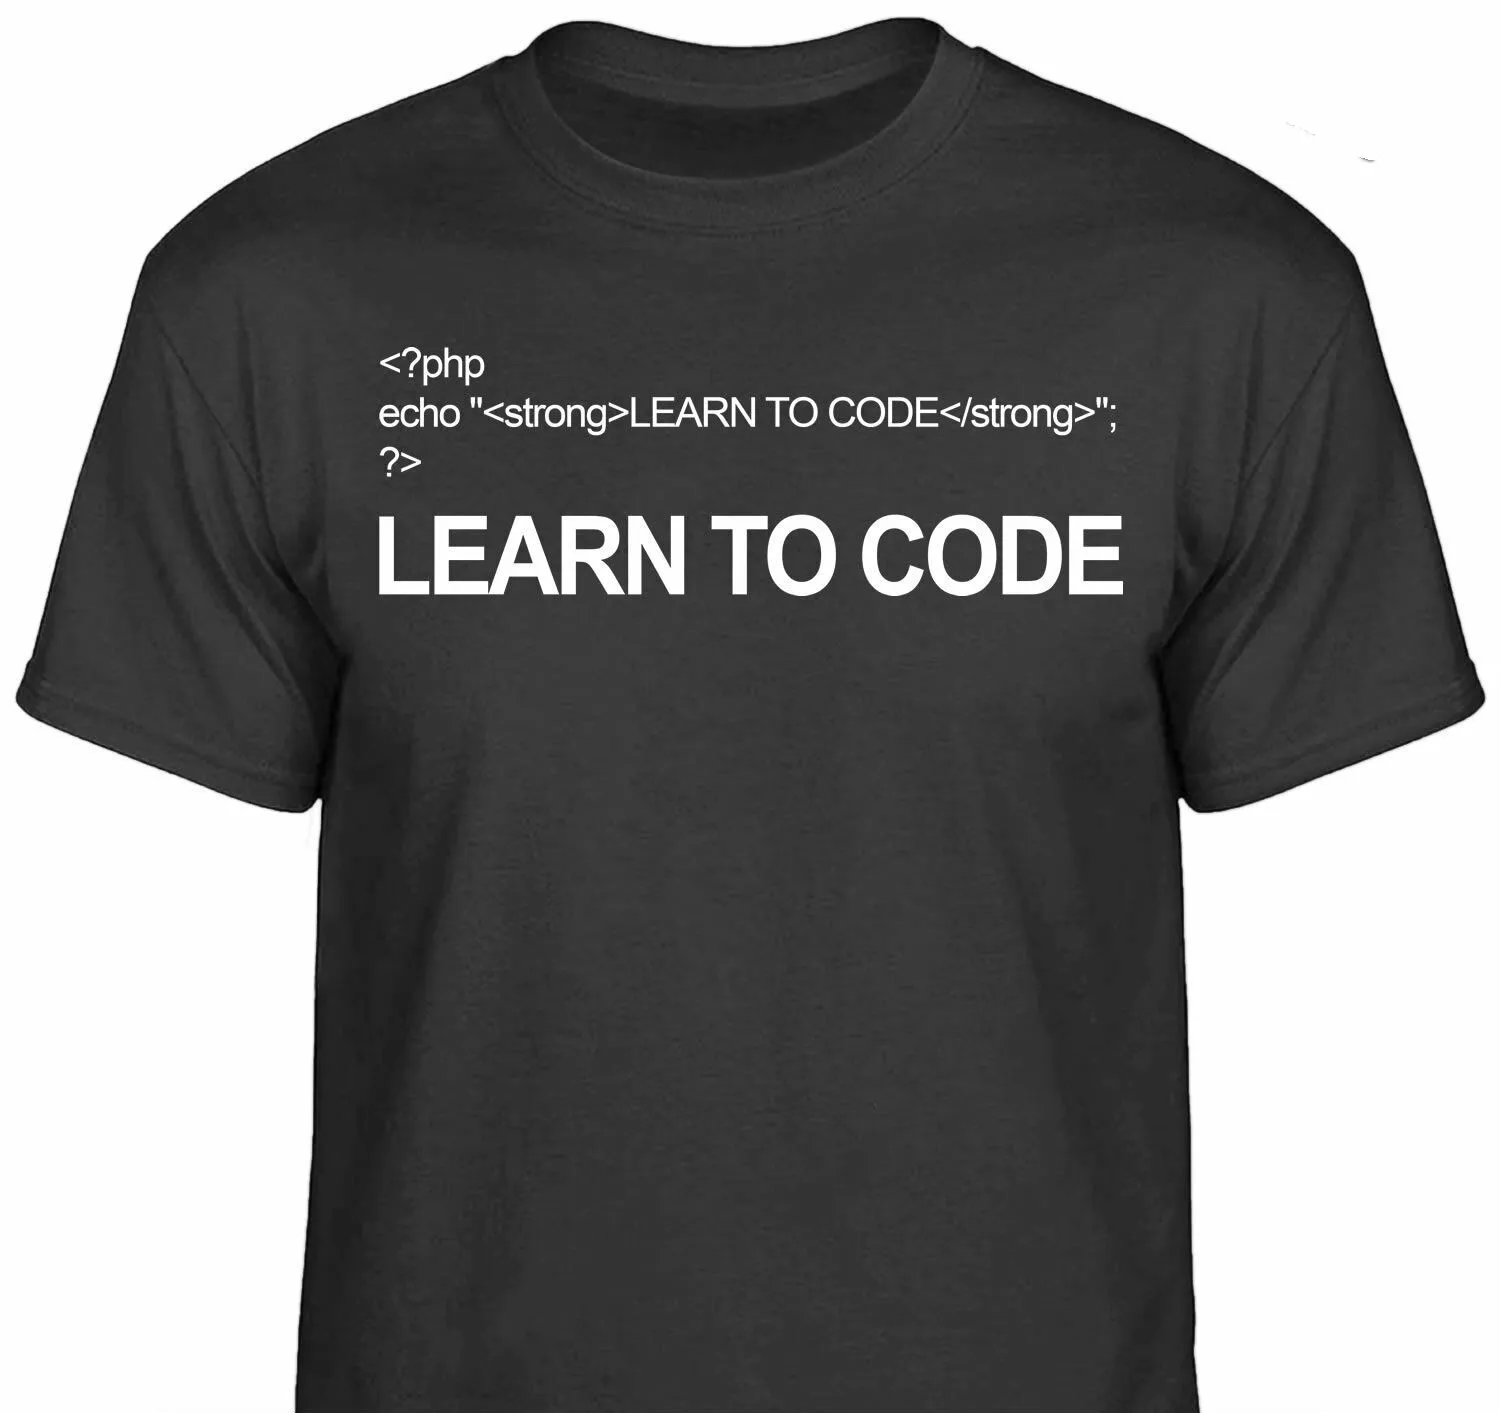 

LEARN TO CODE T-Shirt - 4 COLORS - S-3XL - maga 2020 msm php pepe 4chan qanon